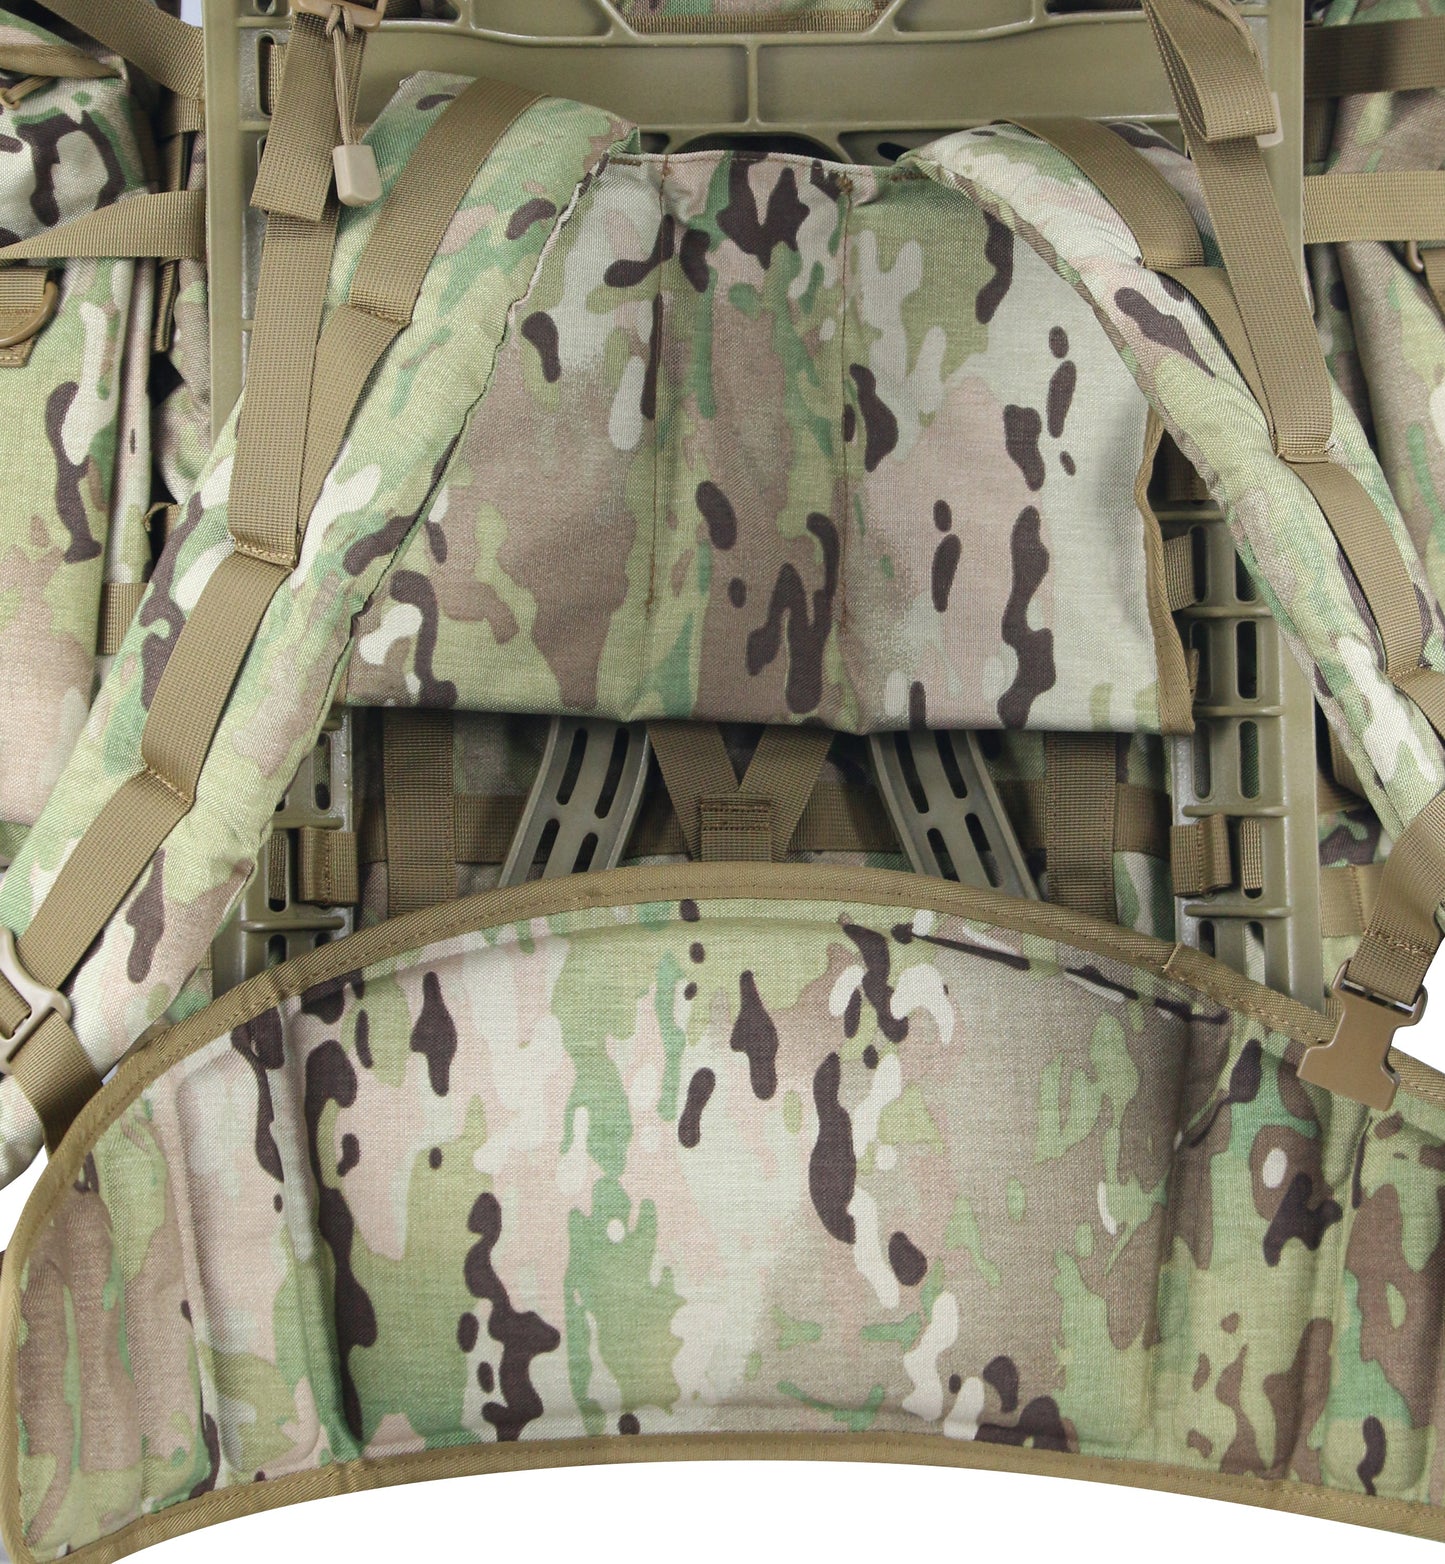 US Army MOLLE II Large Pack - Rucksack with Frame - OCP by ATACLETE